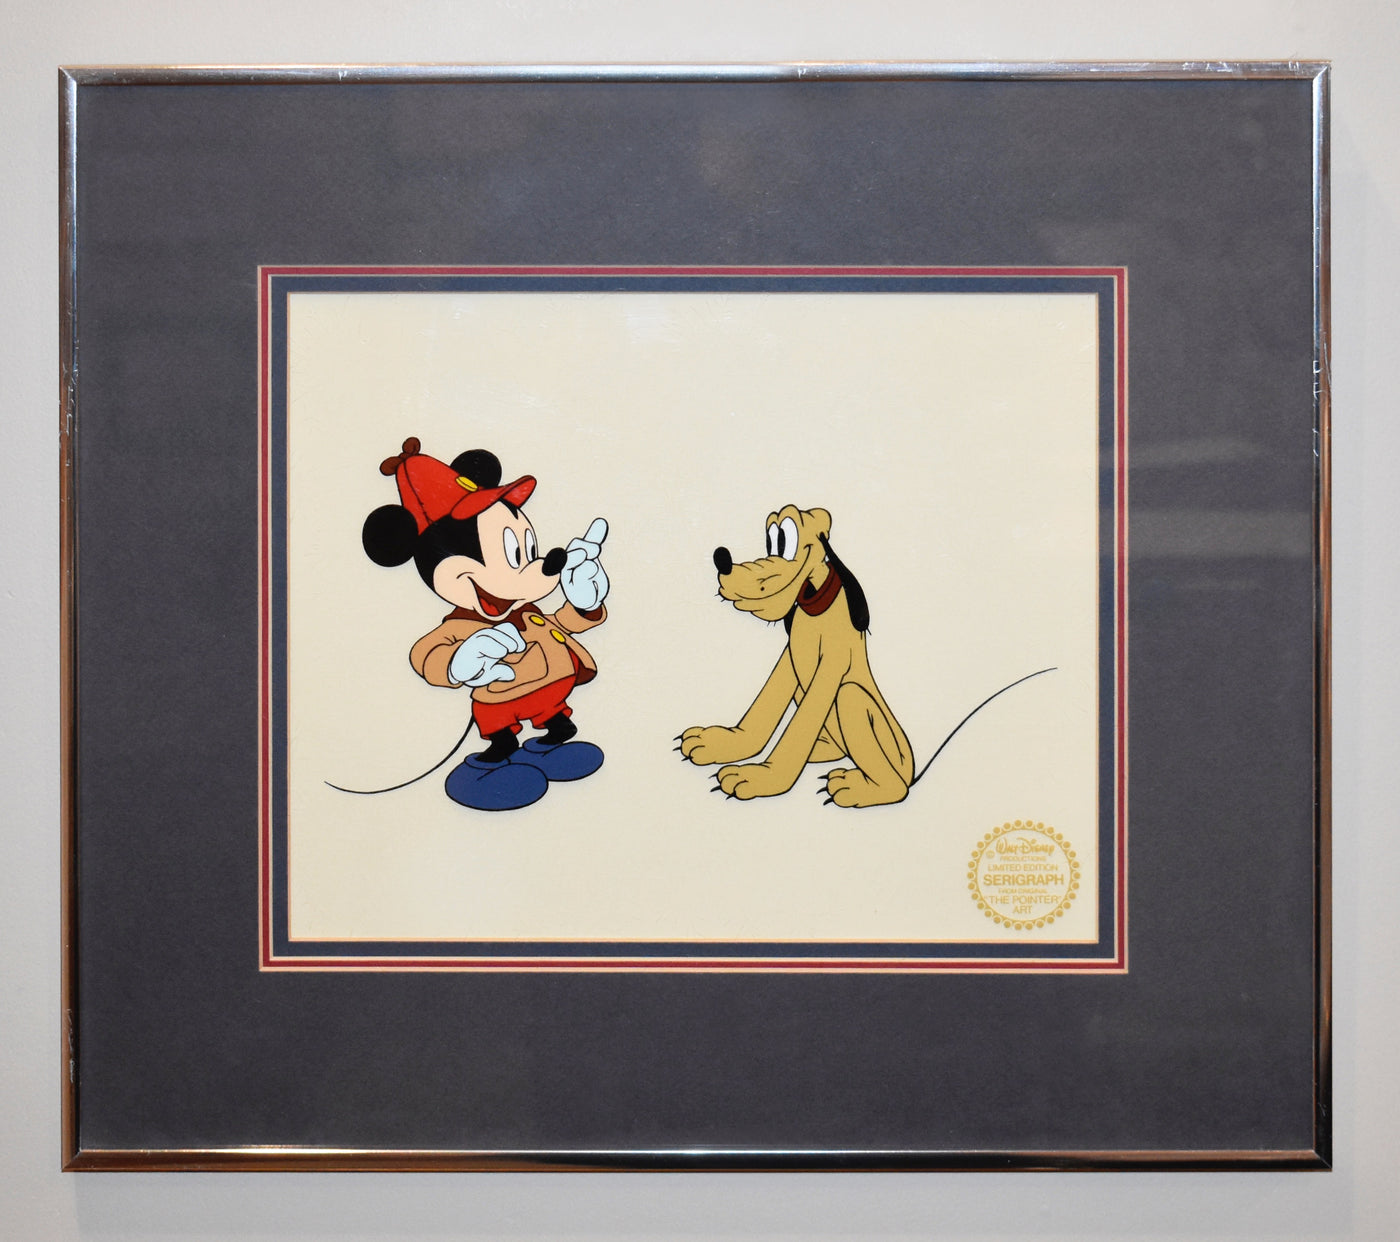 Original Walt Disney Sericel "The Pointer Art" featuring Mickey Mouse and Pluto